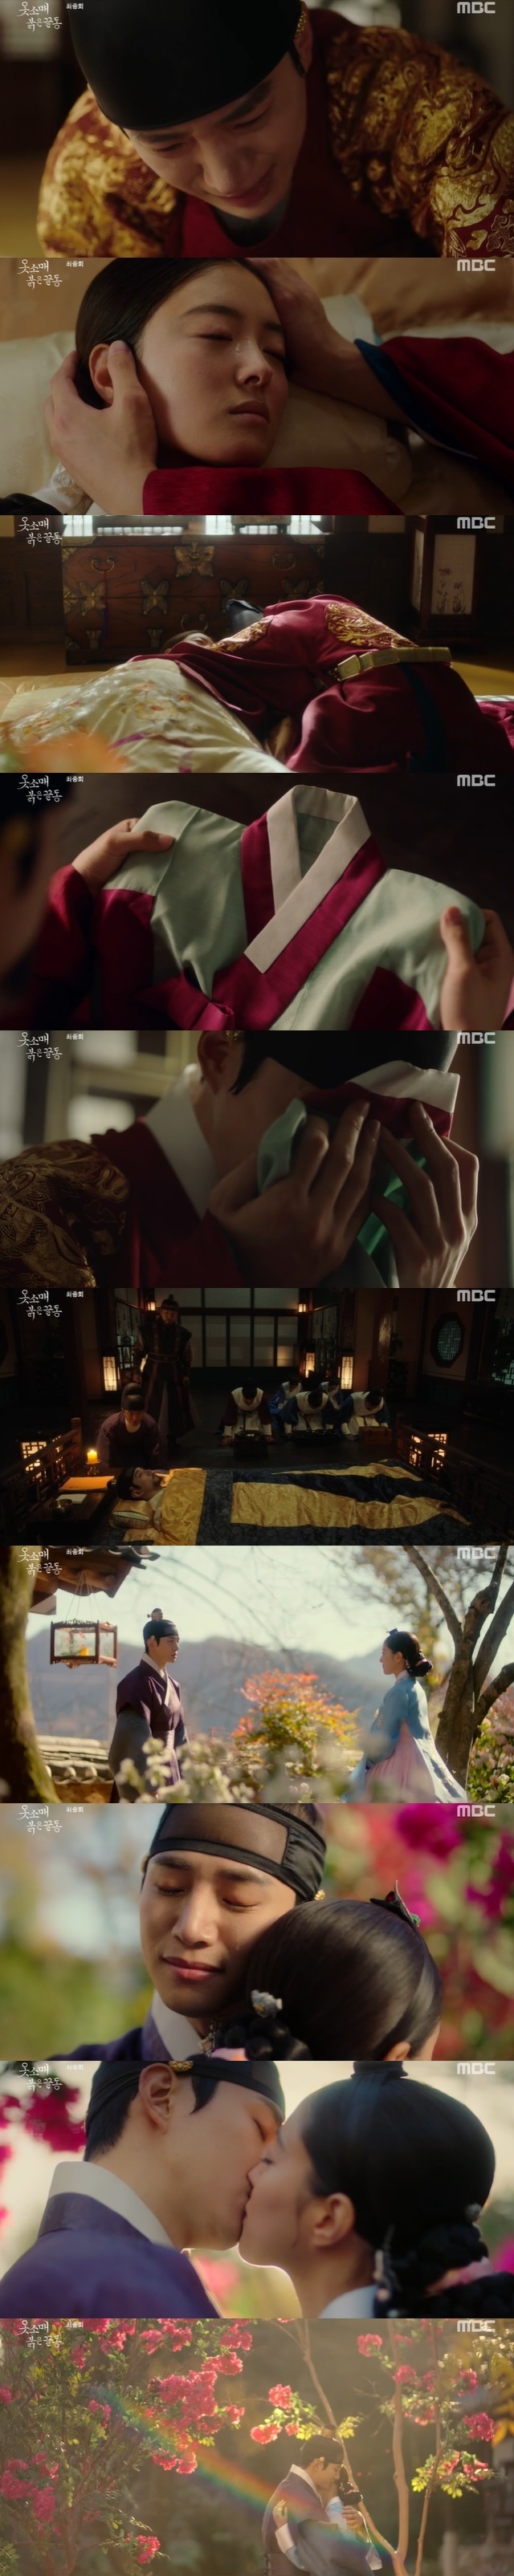 Lee Joon-ho, who had been apologizing that I never love like Mama, eventually met the tragedy of his life with the love of the king in the sense of duty of the king.Lee Joon-ho, Lee Se-youngs love only achieved Young One happiness after death.MBCs Golden Earth Drama The Red Sleeve (playplayed by Jeong Hae-ri / directed by Jeong Ji-in, Song Yeon-hwa) was broadcast on January 1st, and the sad love of Lee San (Jungjo, Lee Joon-ho), Sung Deok-im (Uibin, Lee Se-young), who became a family but was not happy until the end, was drawn.On this day, Hwabin (Lee Seo-bu) was caught up in speculation and put the sin of the connection on Sung Duk-im.Hwabin, who extended a blue paltosh with his great-grandfather, claimed that Sung Duk-im had met the man regularly, and finally chose Sungdeok with the contrast (Jang Hee-jin) that was in conflict with Lee San and his brothers excursion.The false name of this virtue was solved by Lee Hye-bin Hong (Kang Mal-geum).Lee Hye-bin Hong showed up in time to inform that the misunderstood man was Sung Duk-ims pro-brother, Sung Sik (Yang Byung-yeol), and that Sung Duk-ims father was a drowning man with the apostle.Hwabin insisted that Sungdeok was the child of a traitor who had a sinner this time and asked for a beheading, but he was able to overcome the crisis by worrying whether the separation was a question of the kings legitimacy.Afterwards, Isan ordered that Sungdeok be brought into my precipitation tonight in the name of not letting anyone touch the castle anymore.At first, Sung Duk-im rejected the Seungeun of this discrete, but said, I can live without seeing me for the rest of my life. If you really refuse me tonight, I will let you go.Instead, I do not see it again. After all, I spent a night and became a seungeun palace.Sung Duk-im was reappointed in three months in the love of Seungeun in the extreme love of the separated world, but the separation was not pleased by the kings duty.After hearing the news of Sung Duk-ims reappointment, he found the palace, not the Agnaldo Timóteo night, to comfort the heavy war that had been long for it but could not be reappointed.Sung Duk-im, who heard that the waiting mountain would spend the night in the palace, told Seo Sang-gung (Jang Hye-jin), I know that the king is not my father but the Jiabi of Mama.I already knew from the beginning that I could not hope for anything to the King and I should not expect anything. The separated society symbolizes a harmonious couple to Sung Duk-im, who will be a formal bin, and has lowered the righteousness that means I like.But as they hoped, they did not become a harmonious couple.Sung Duk-im lost his son Moon Hyo-seja to plague during pregnancy, and his comrade Son Young-hee (Lee Eun-sam), who had a relationship with the star, suffered the death.Sung Duk-im was hurt by the separation of the duty as a king and the decision as a king in all of this, but I knew from the beginning that you were such a person.I can not help myself, he said.Sung Duk-im recalled the happy Donggung and the days of the courtesan, and someday Agnaldo Timóteo would come back.However, Sung Duk-im eventually died without seeing the flower bloom again in the flower tree of the hall. Sung Duk-im, who fell during pregnancy, felt his last and found his comrades, not separated.Isan was not able to do this, and he asked, Did you not love me at all, did not you give me a very small heart?Sung Duk-im said, If I did not like it, I would have run away at any cost.I do not know that it was my choice to stay with the King in the end. Since then, Isan has been devoted to his life as a king, a perfect monarch who hears the word Taepyeongseongdae for the people and Sunggun for his servants.But I still had no forgotten that Isan was a holy virtue; the middle-aged Isan lay ill and closed his eyes, and the brief dream returned the Isan to the happiest of times.In my dream, Sungdeokim was still by the side of the discrete, and a lonely life without Sungdeokim was only a nightmare.Isan once again directed to Sungdeok in his dream, I never love like Mama.I will keep it to the end, the person I love. I soon realized that this is not real.So, Isan led Sung Duk-ims hand to see the flower tree of the hall that he promised to do but did not see.Then go back to the waiting people. The place to be is here. It turns out there is not much time. I could not wait. So love me.Please, love me, he asked.